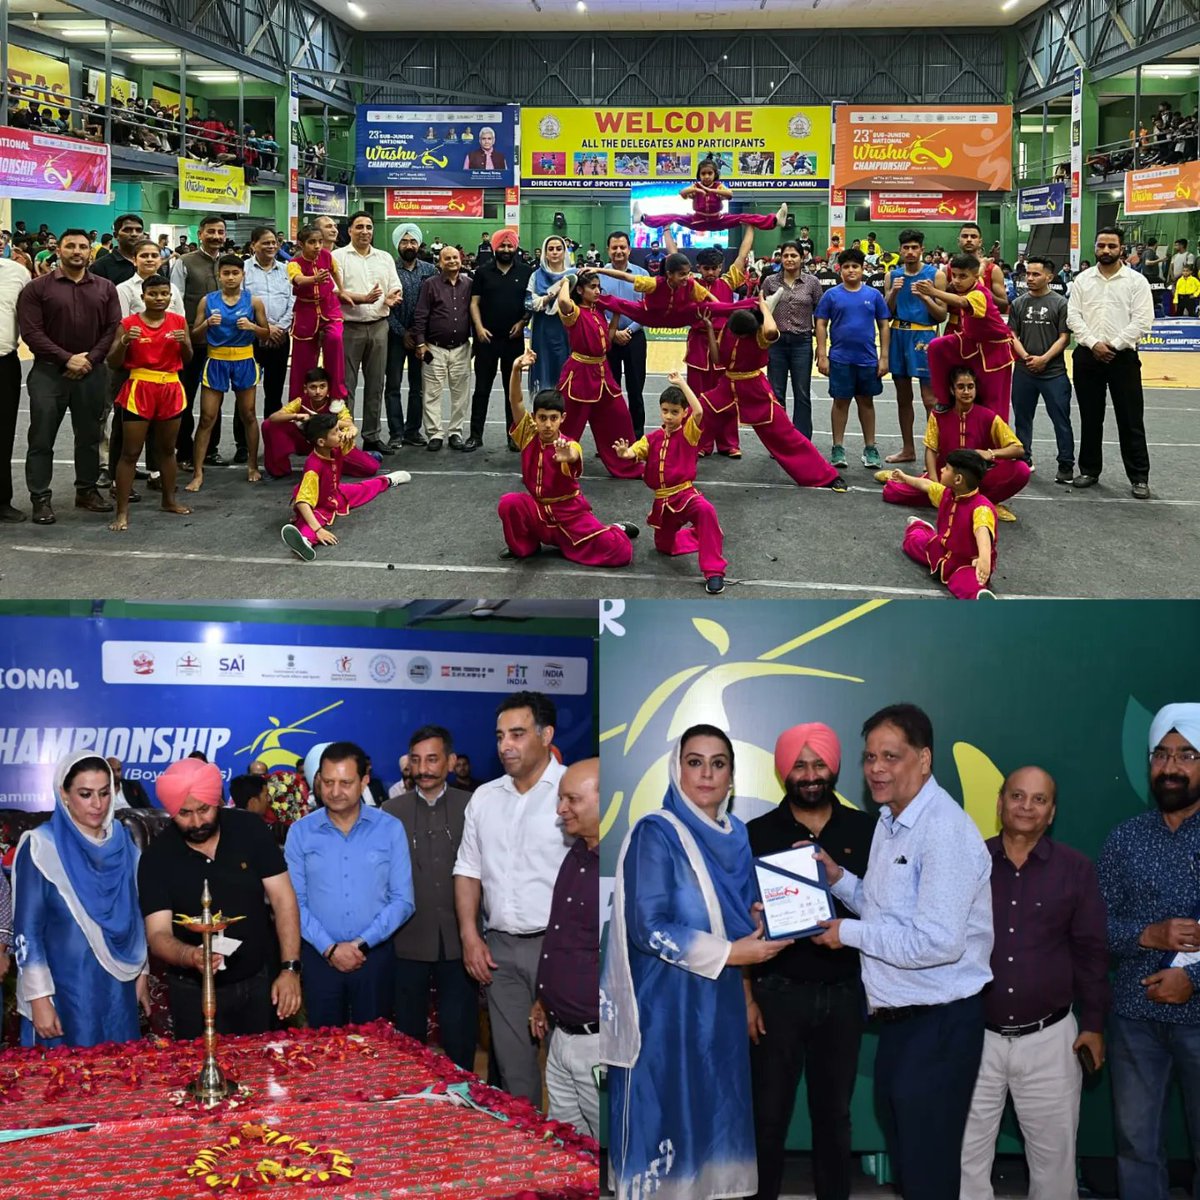 The Secretary JKSC, Nuzhat Gull today inaugurated the 23rd Sub-Junior National Wushu Championship for both boys and girls in Jammu. The event is being organized by the Wushu Association of J&K in collaboration with the J&K Sports Council in the Gymnasium Hall of Jammu University.